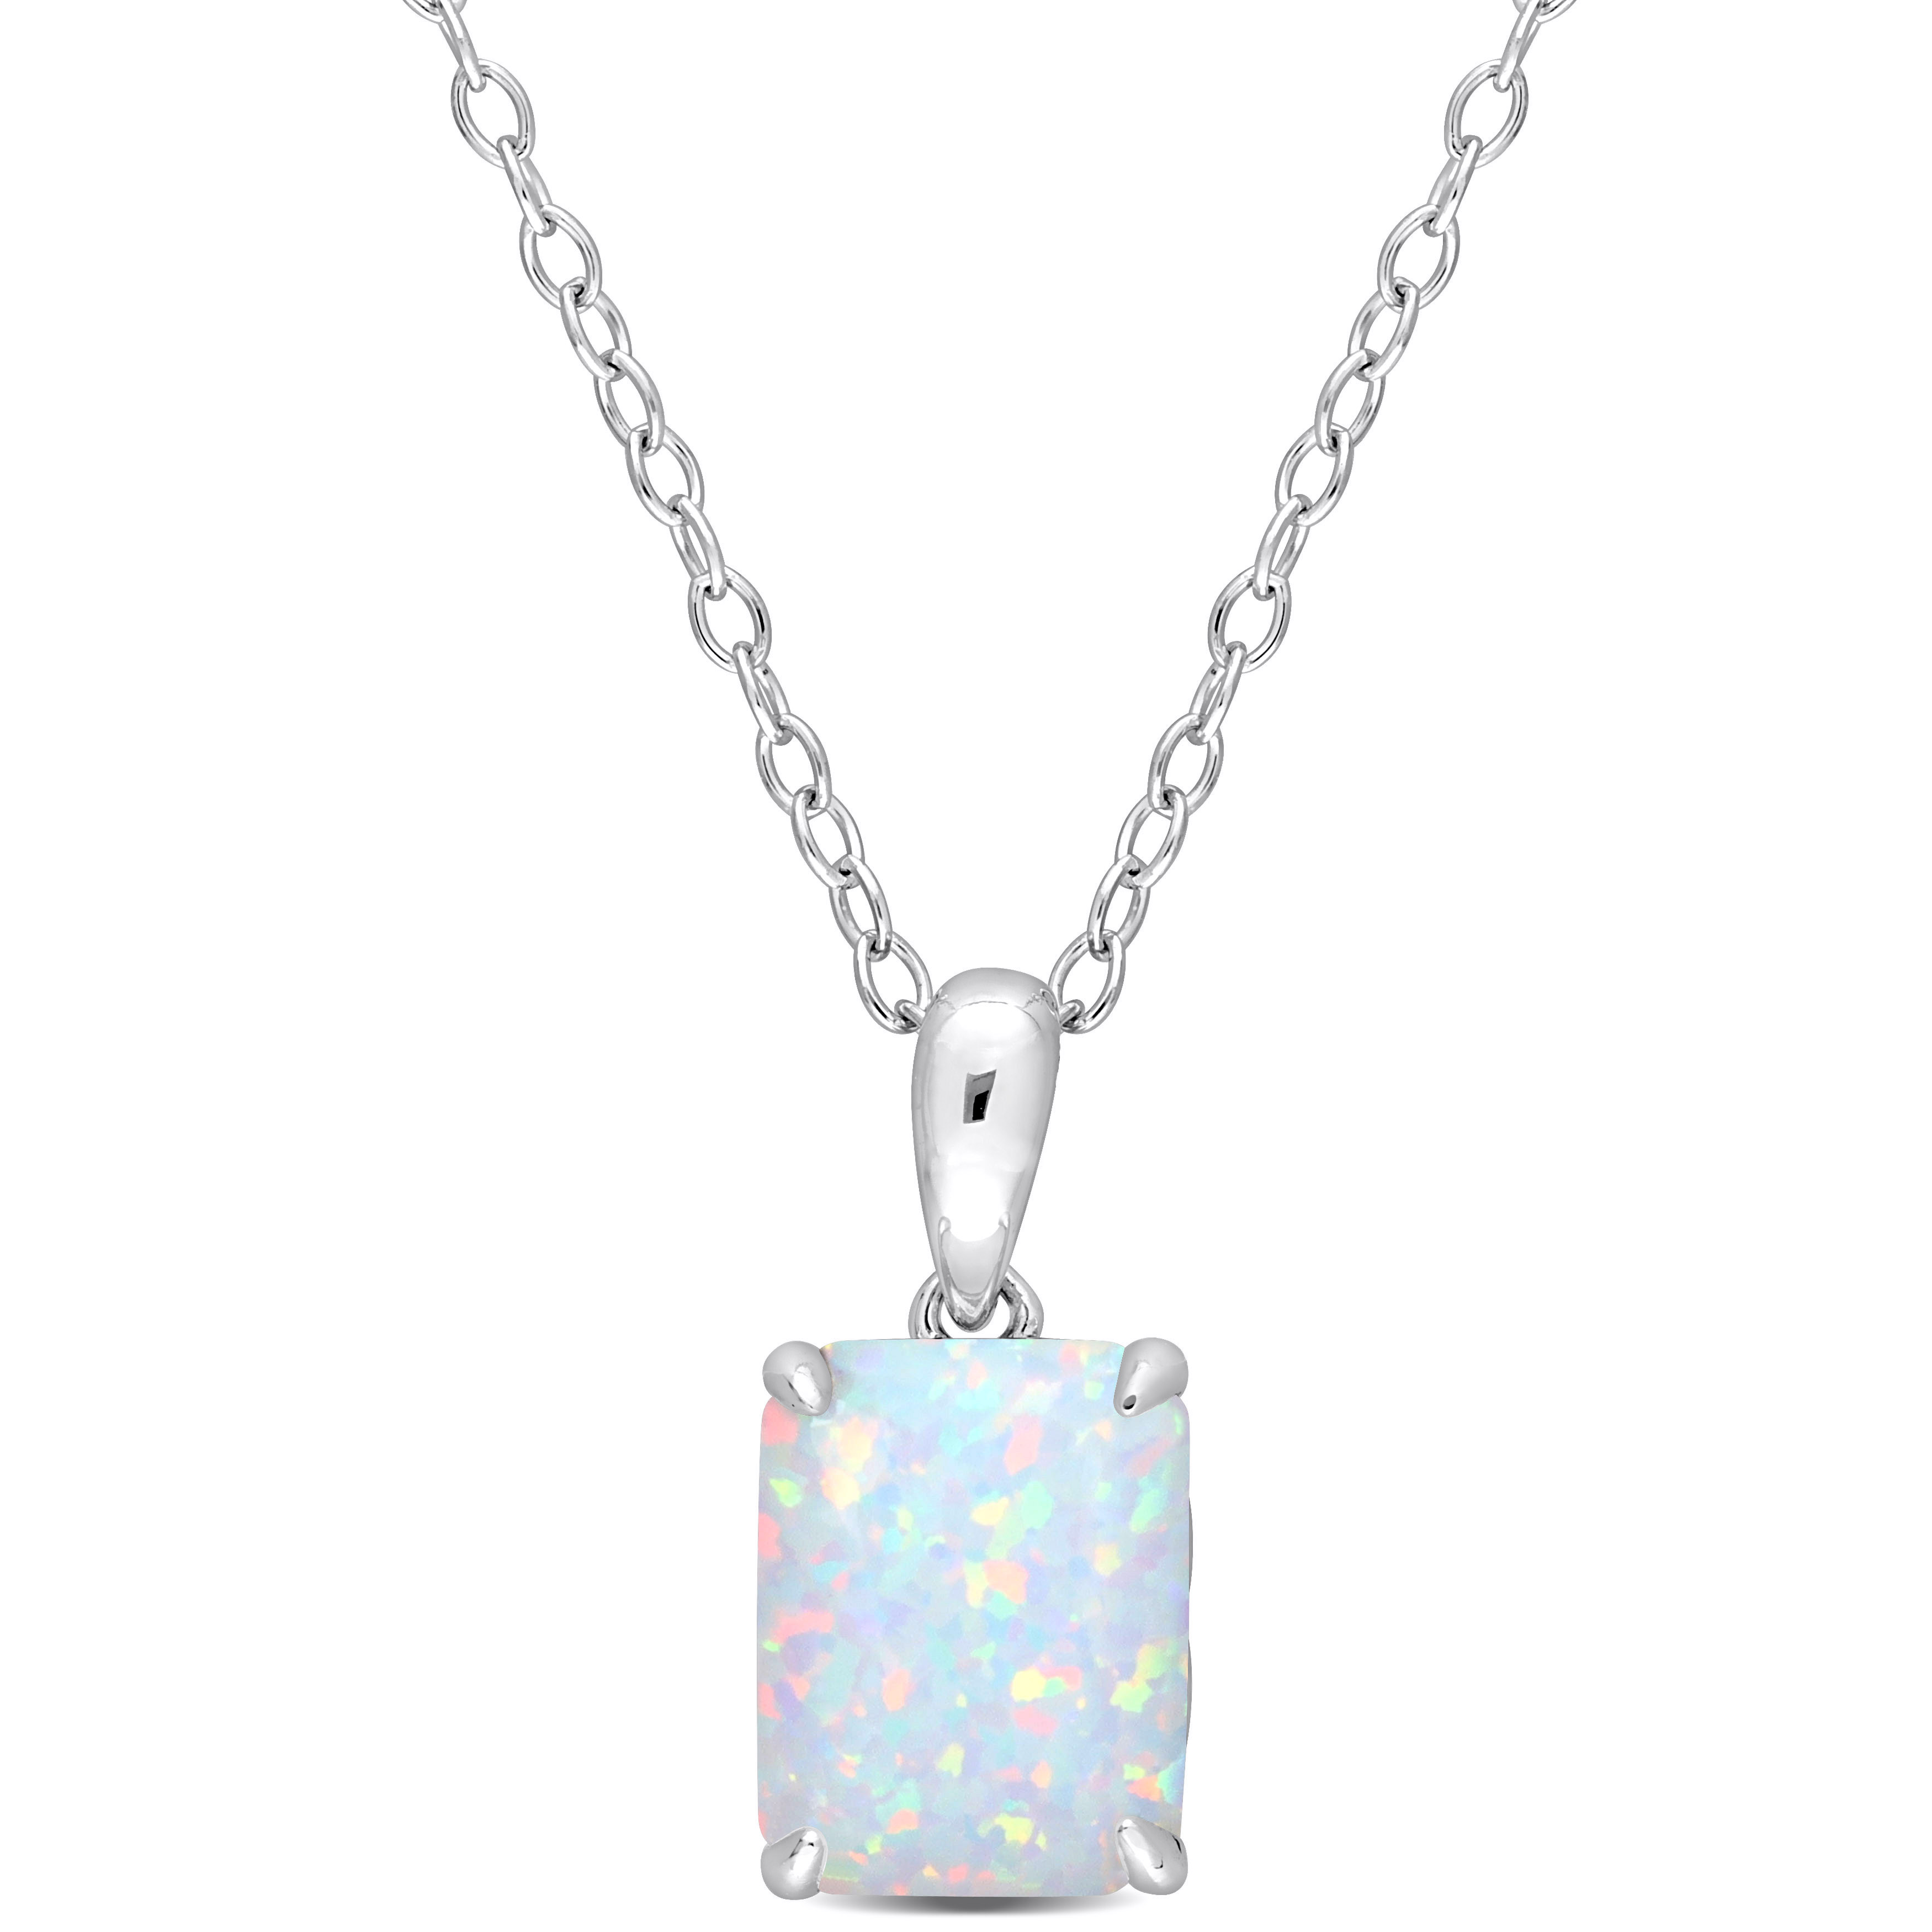 1 7/8 CT TGW Emerald Cut Created Opal Solitaire Heart Design Pendant with Chain in Sterling Silver - 18 in.